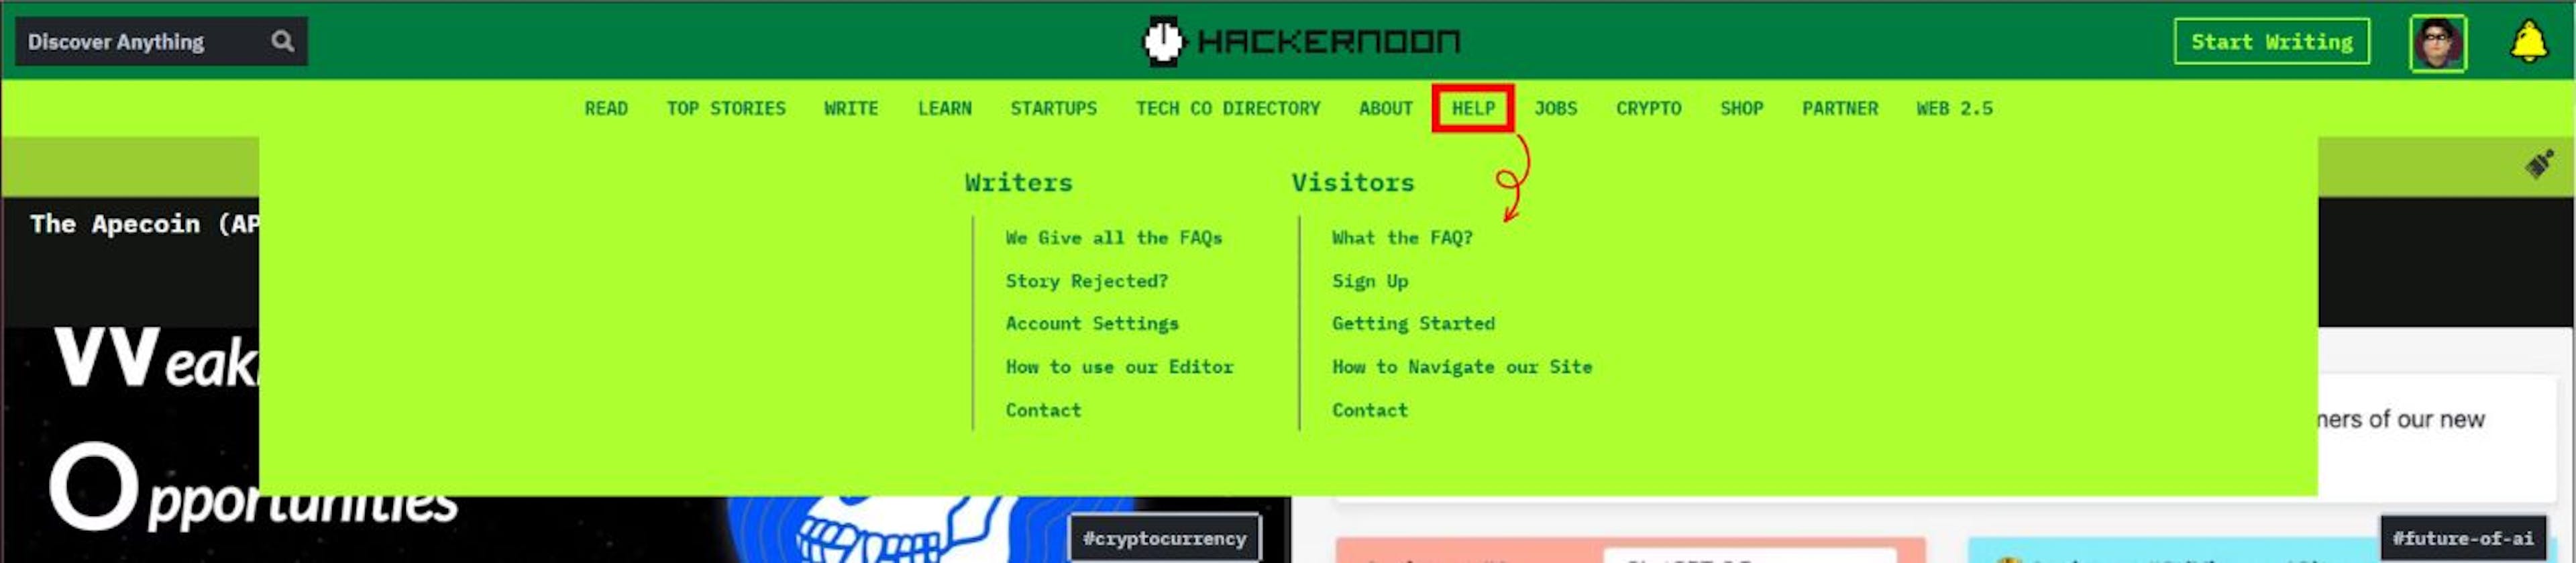 Figure 1. HackerNoon HELP section on the navigation bar.